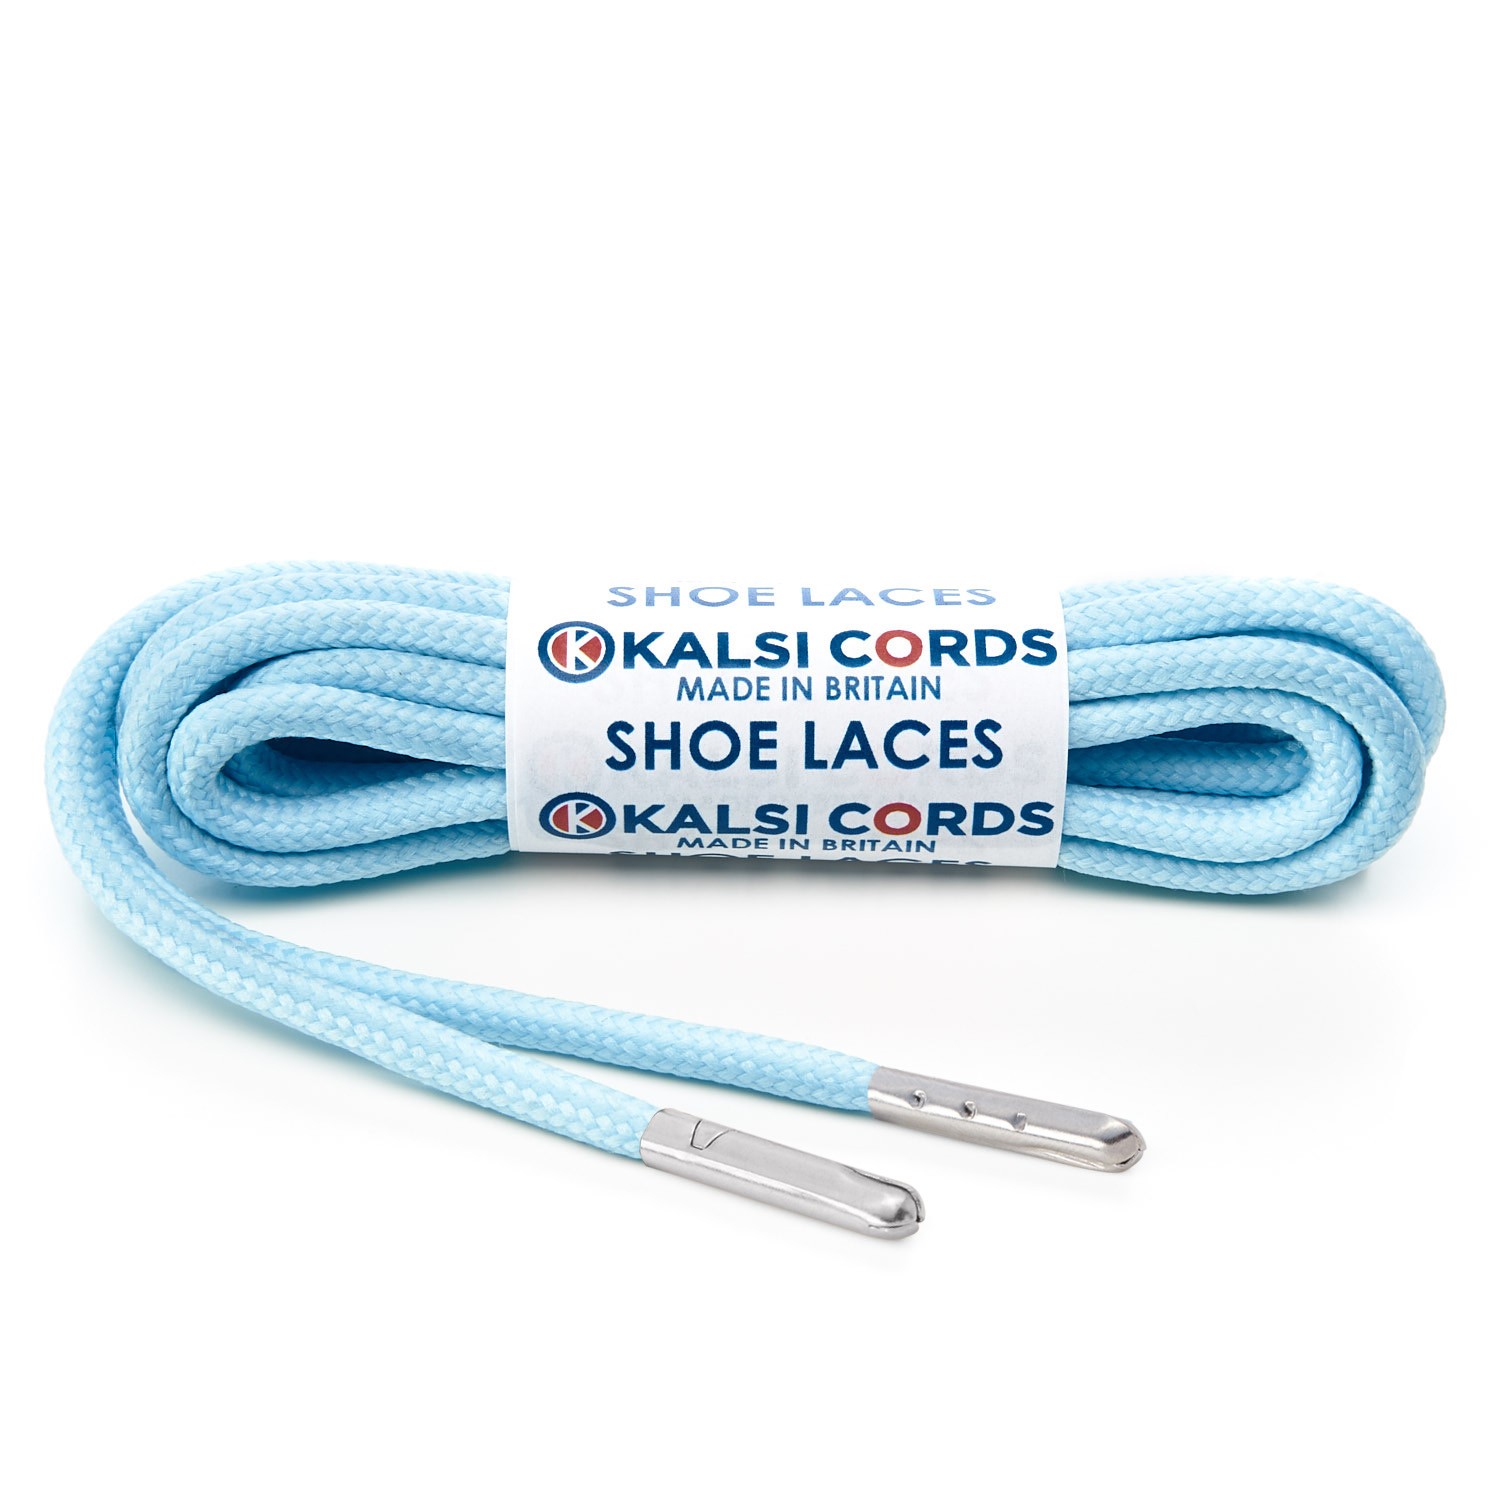 T621 5mm Round Polyester Shoe Laces Baby Blue 1 Silver Metal Tip Kalsi Cords